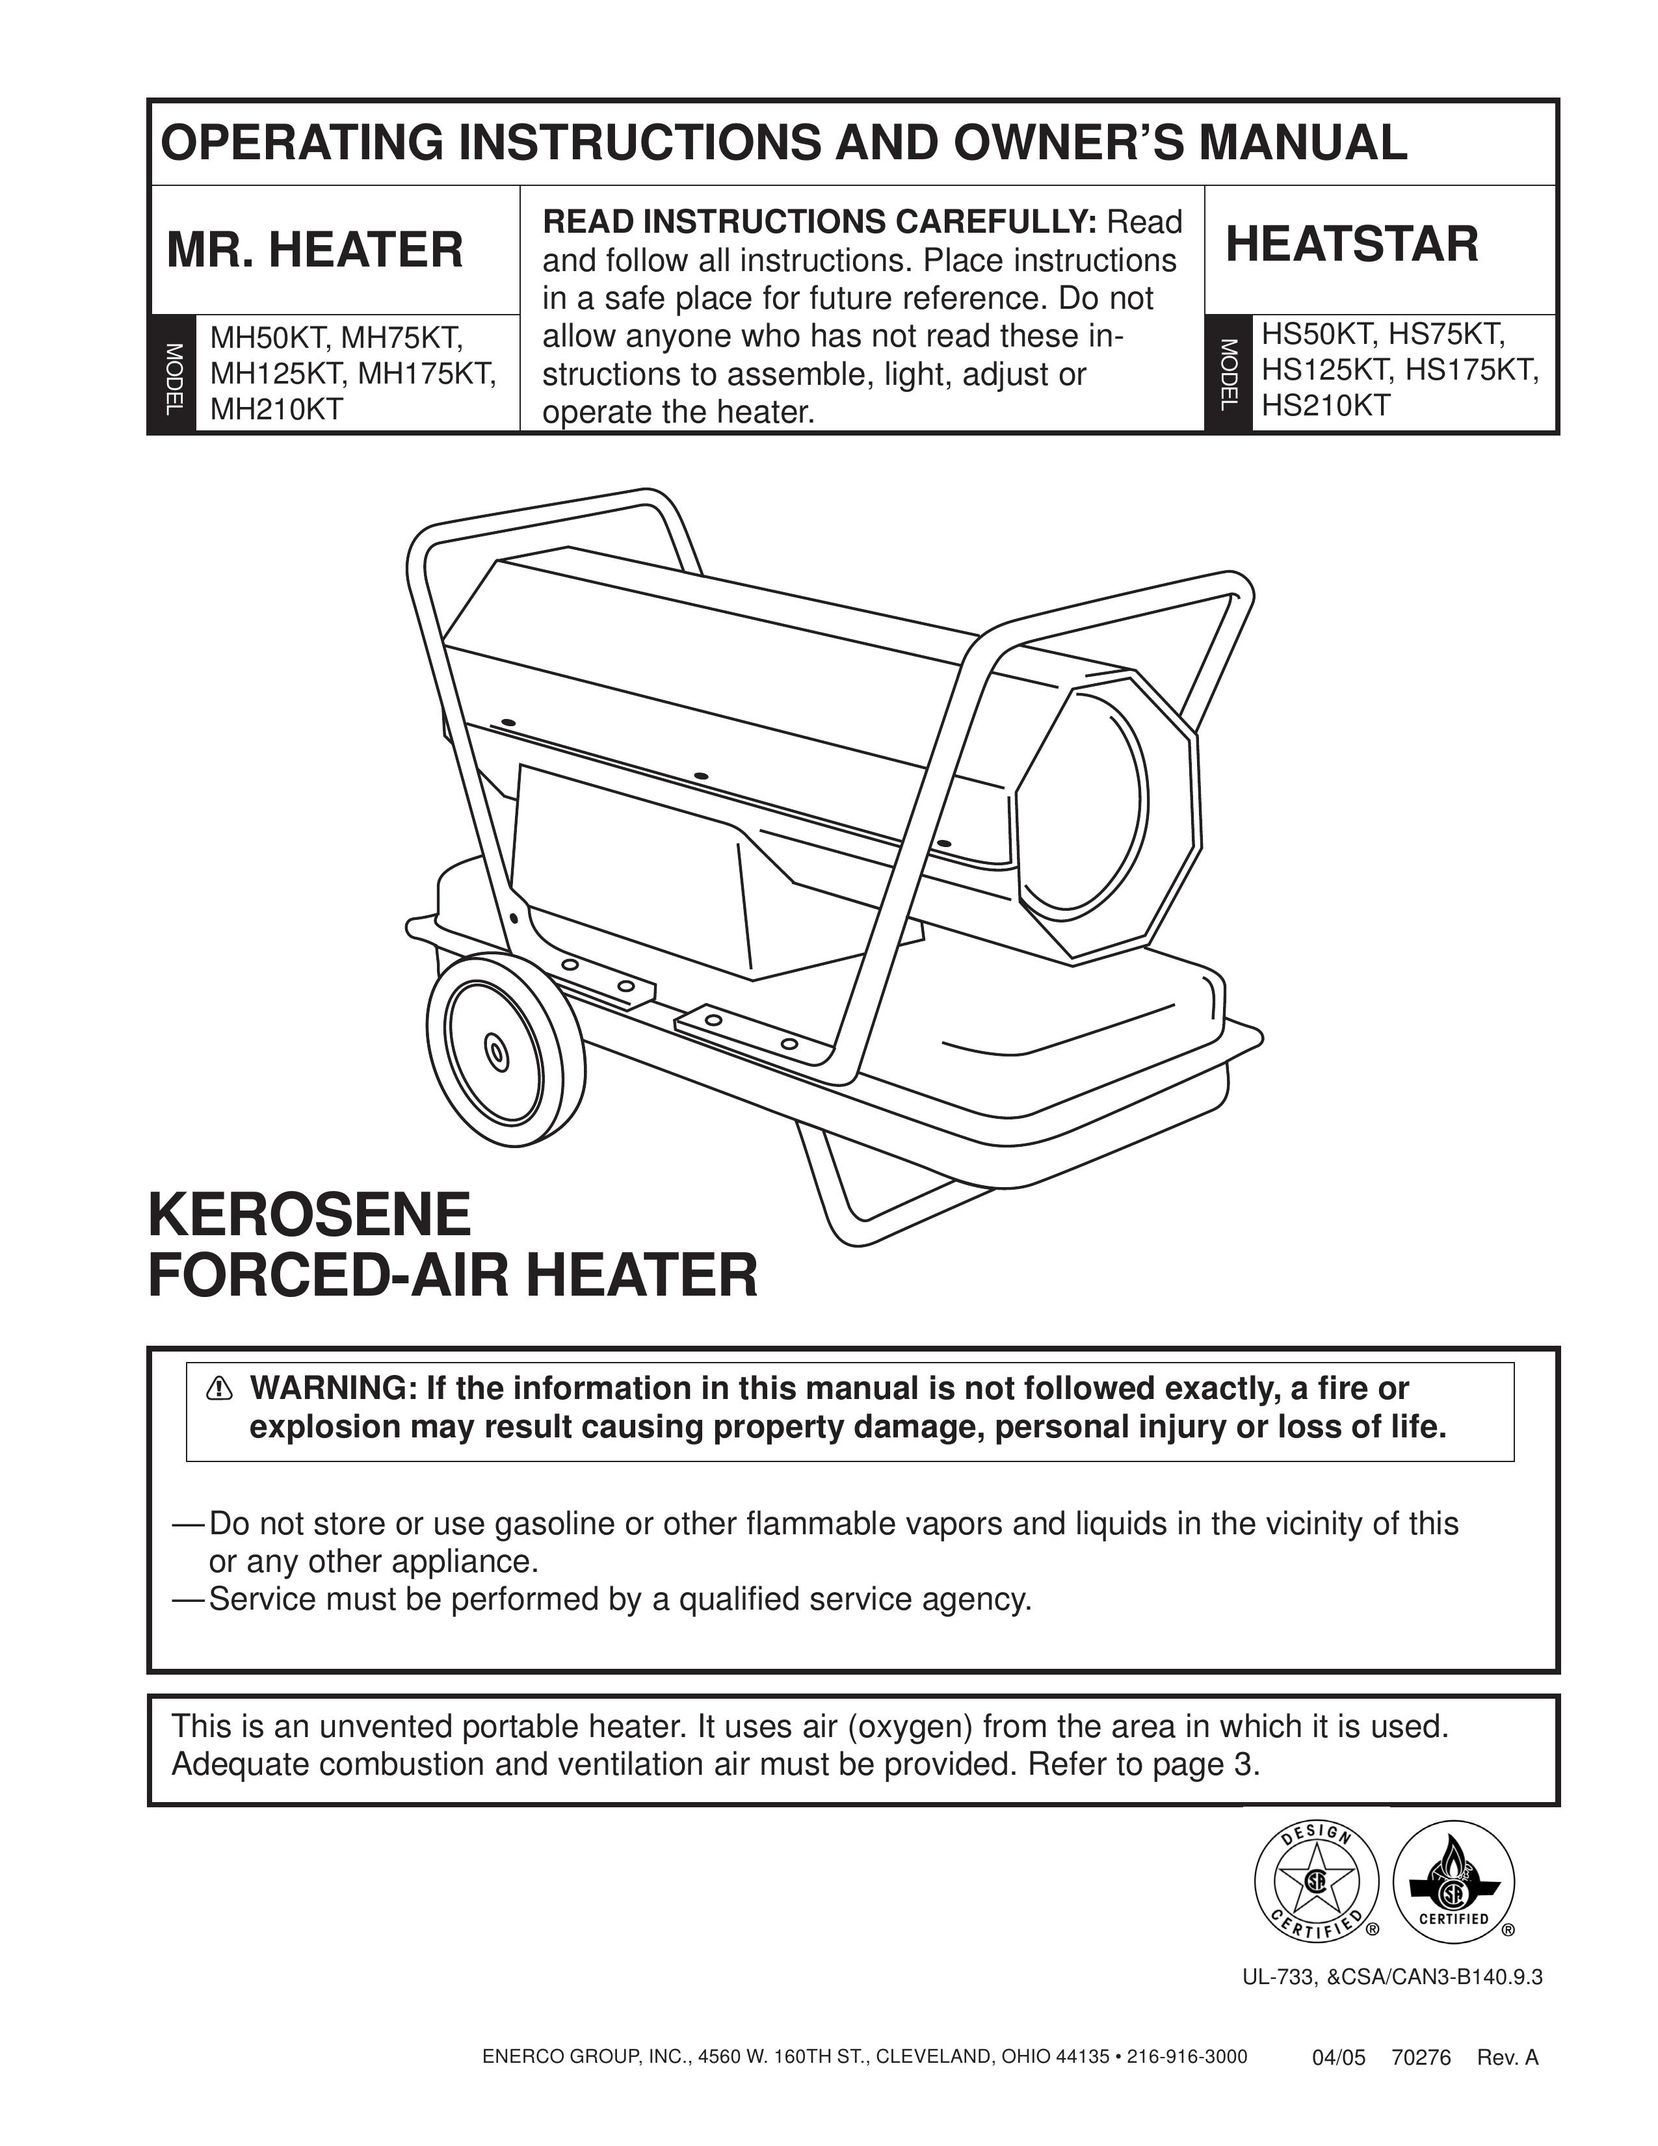 Enerco MH210KT Gas Heater User Manual